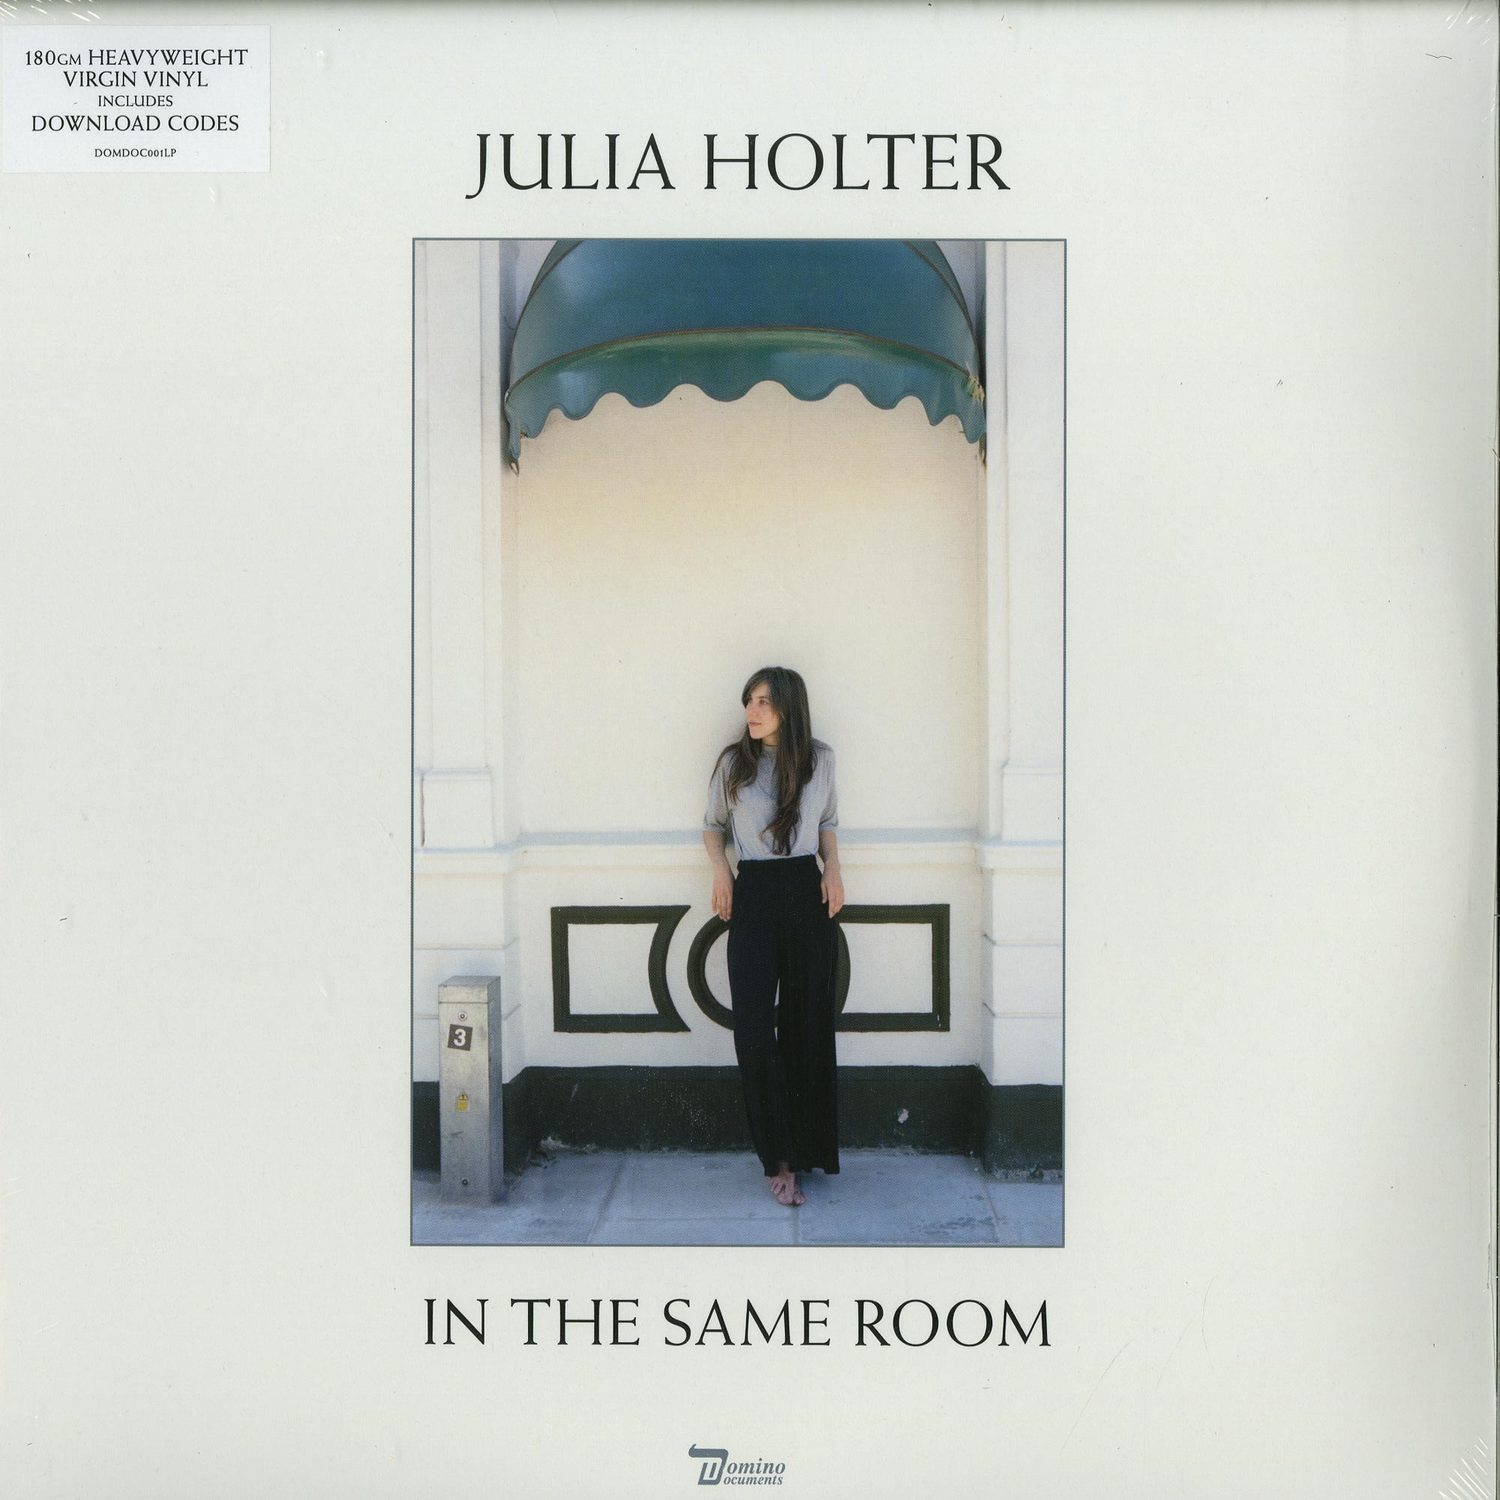 Julia Holter - IN THE SAME ROOM 